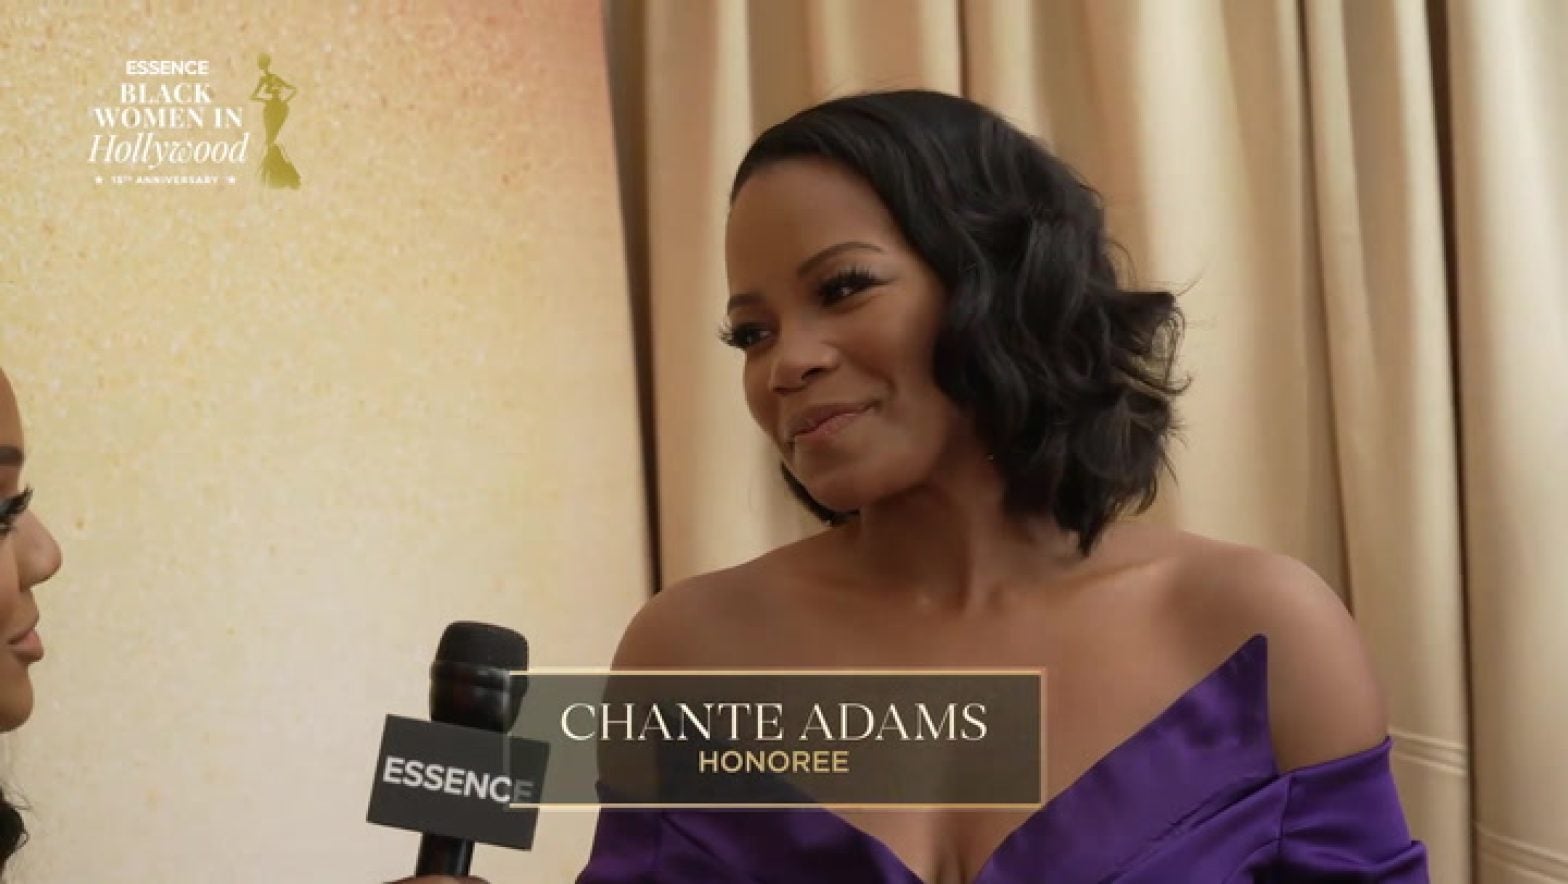 Chanté Adams Talks About Being A Honoree And Gives Advice To Aspiring Actresses